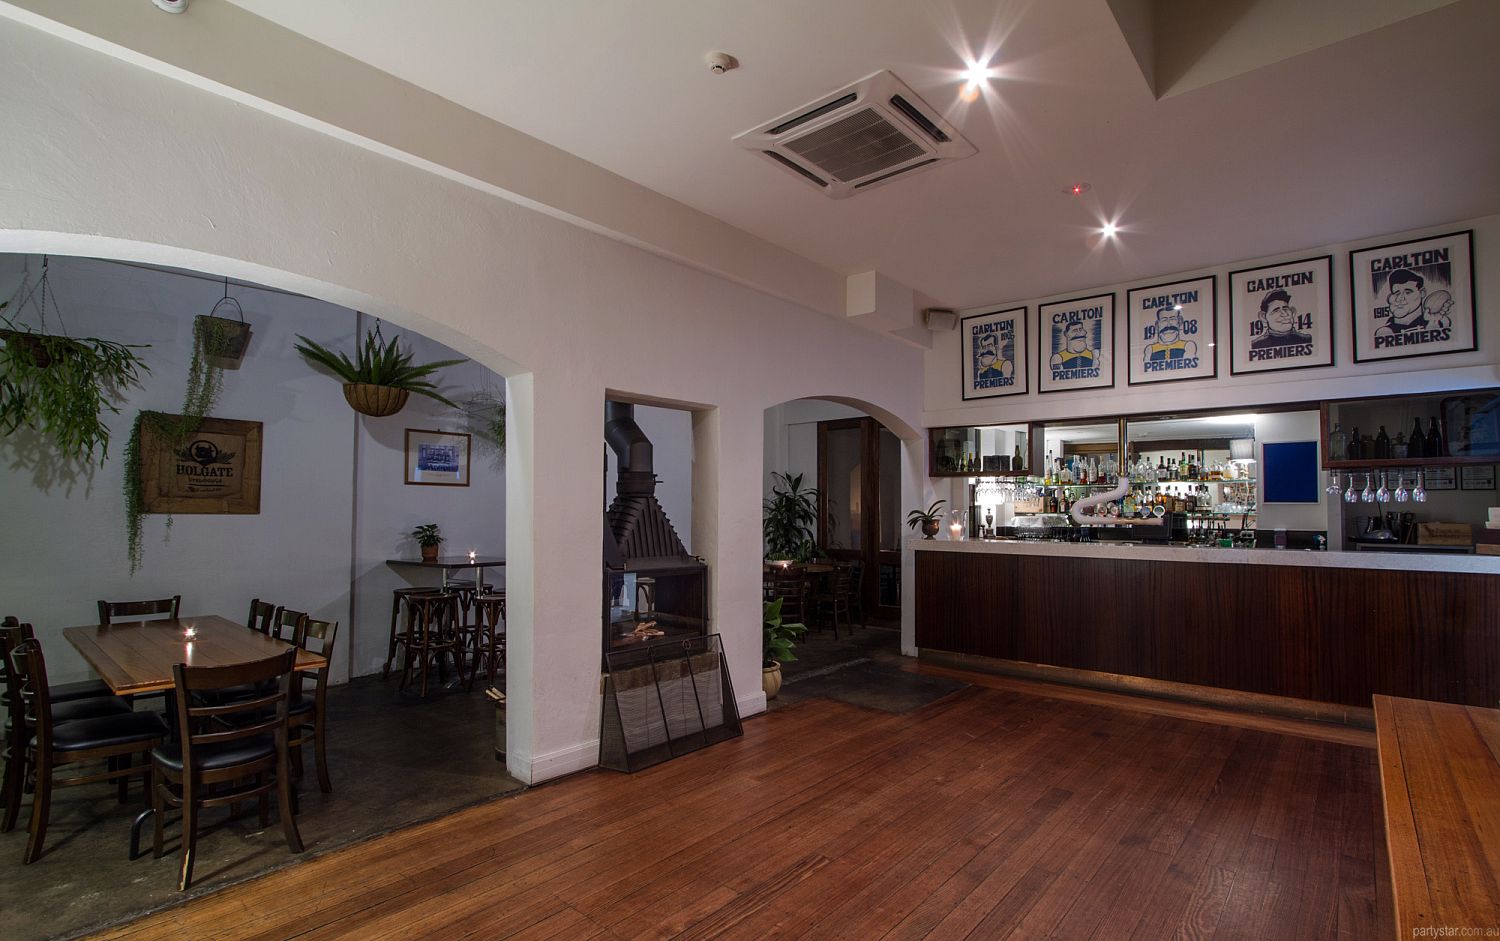 Naughtons Parkville Hotel, Parkville, VIC. Function Room hire photo #2